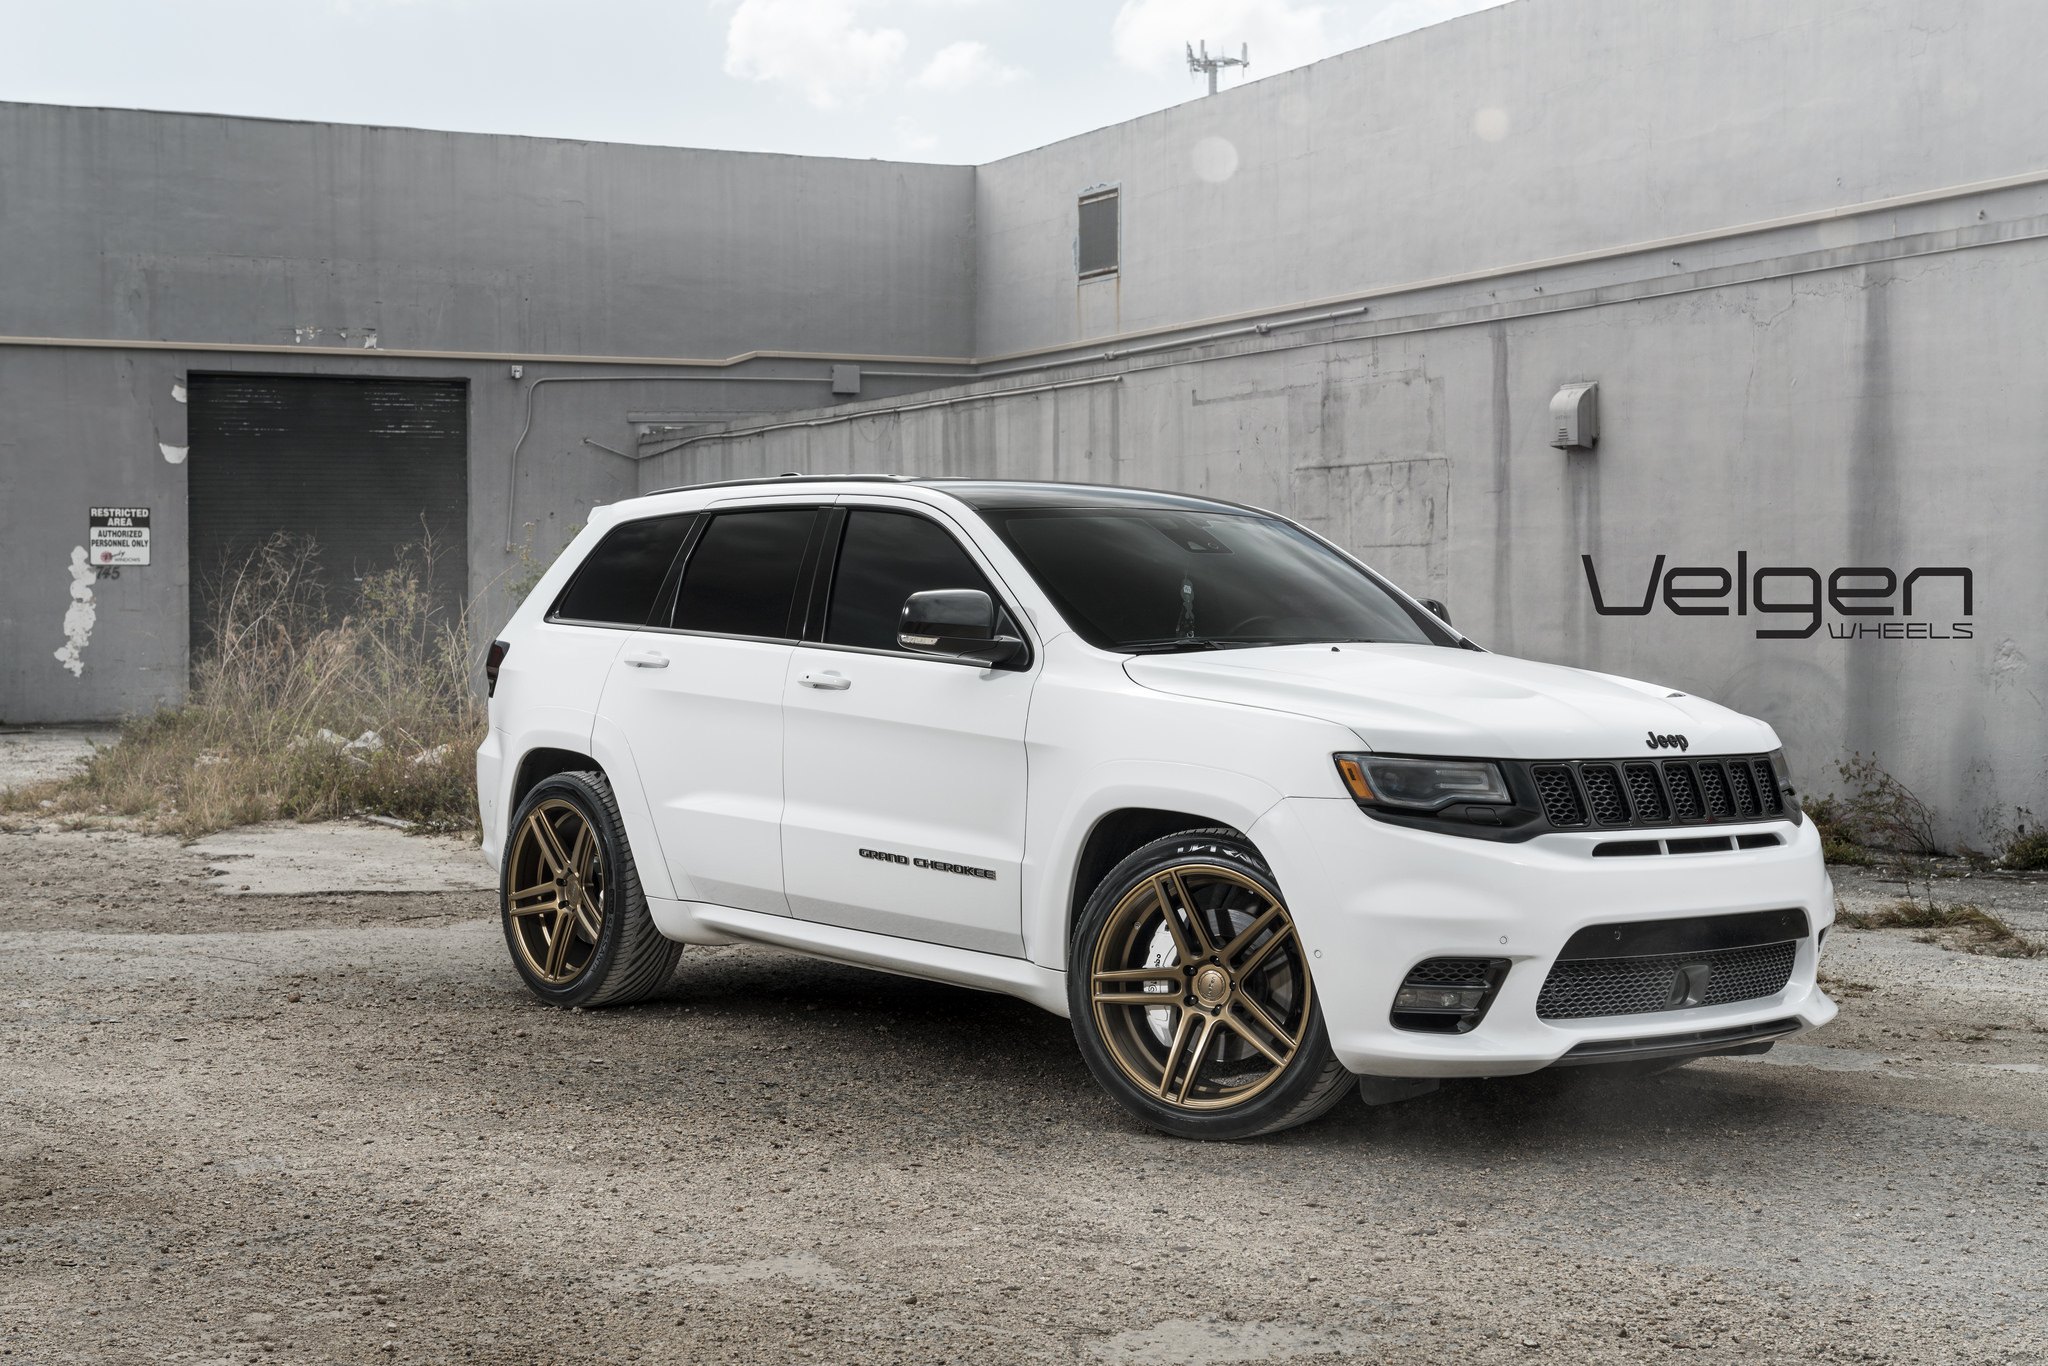 Aftermarket Front Bumper on White Jeep Grand Cherokee - Photo by Velgen Wheels